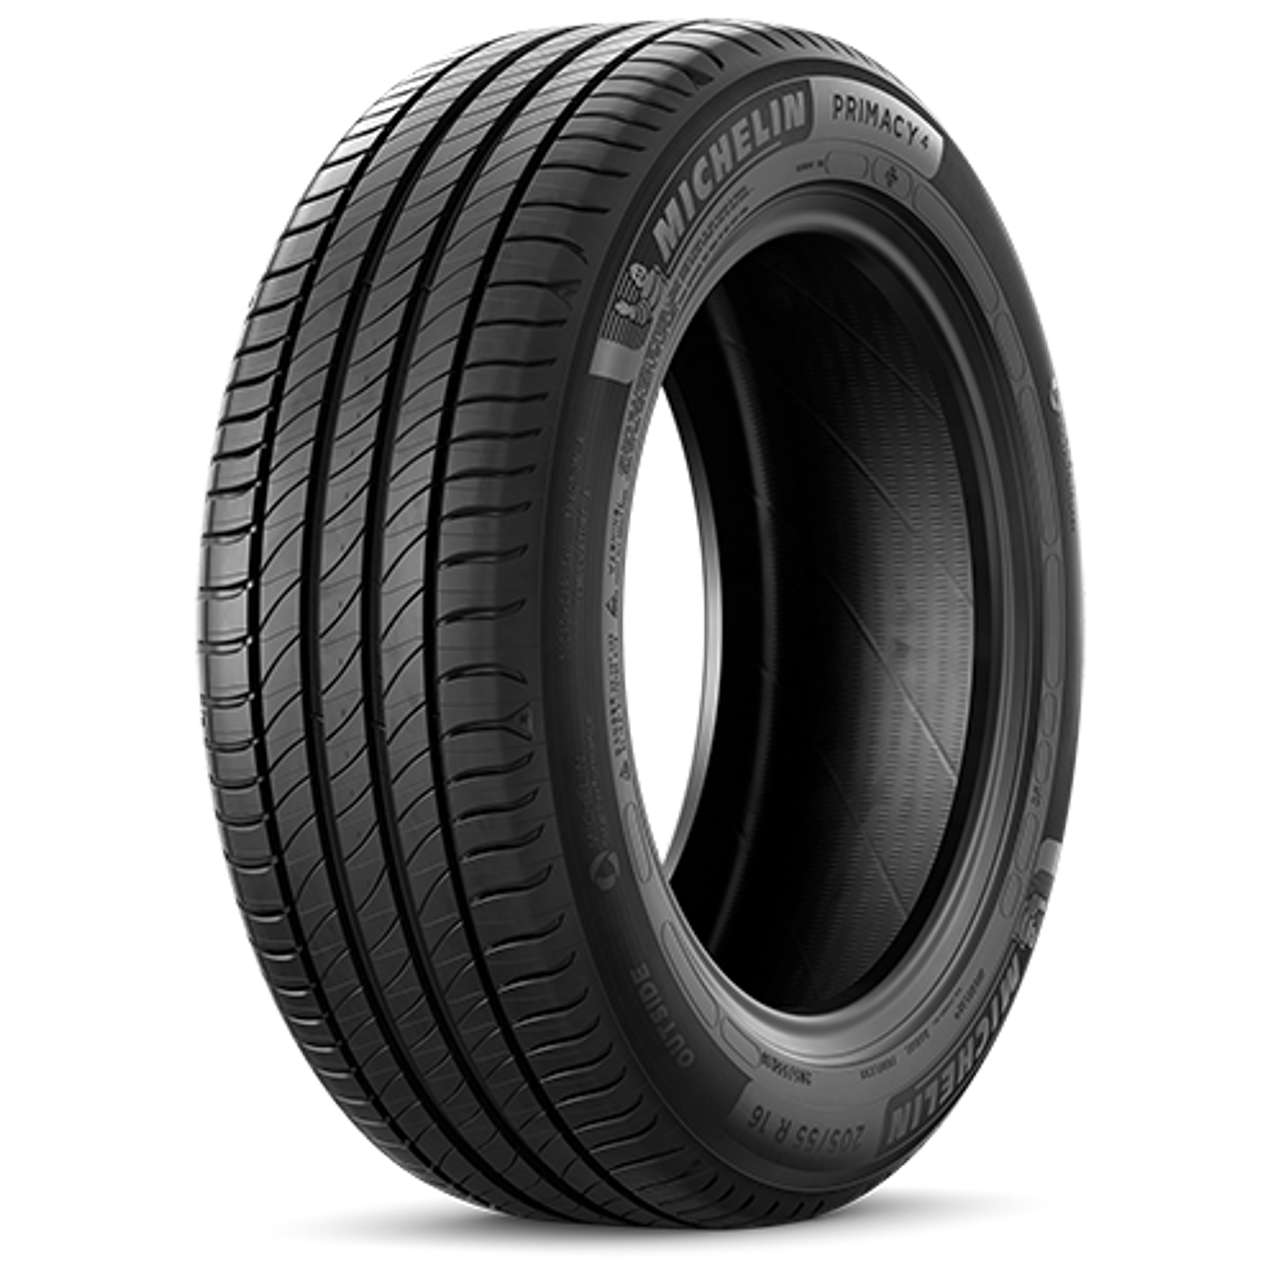 MICHELIN PRIMACY 4+ 205/60R16 92H BSW